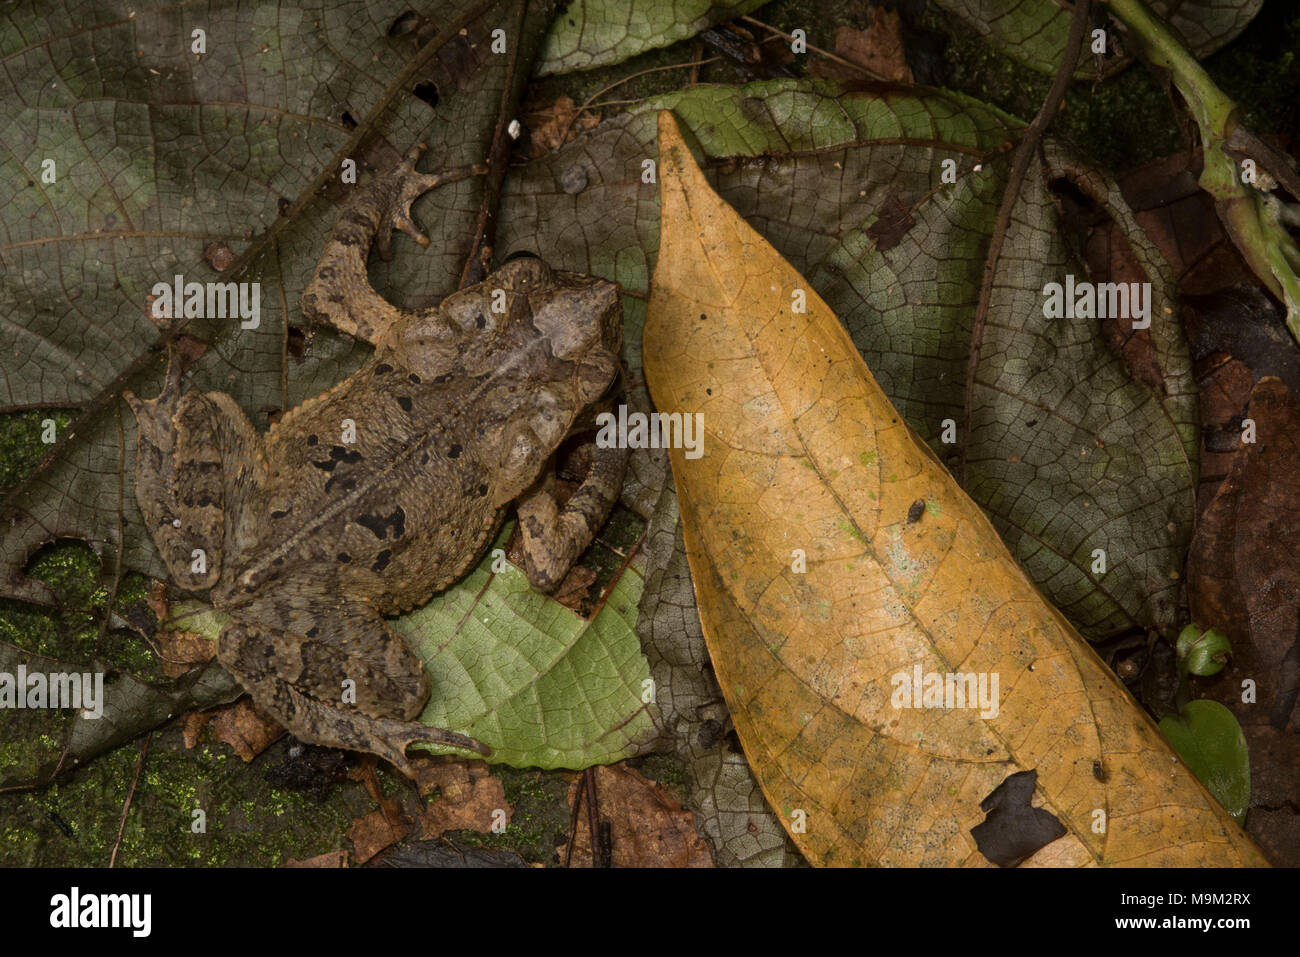 A south American common toad (Rhinella margaritifera) hidden in plain sight amidst the leaf litter. Stock Photo